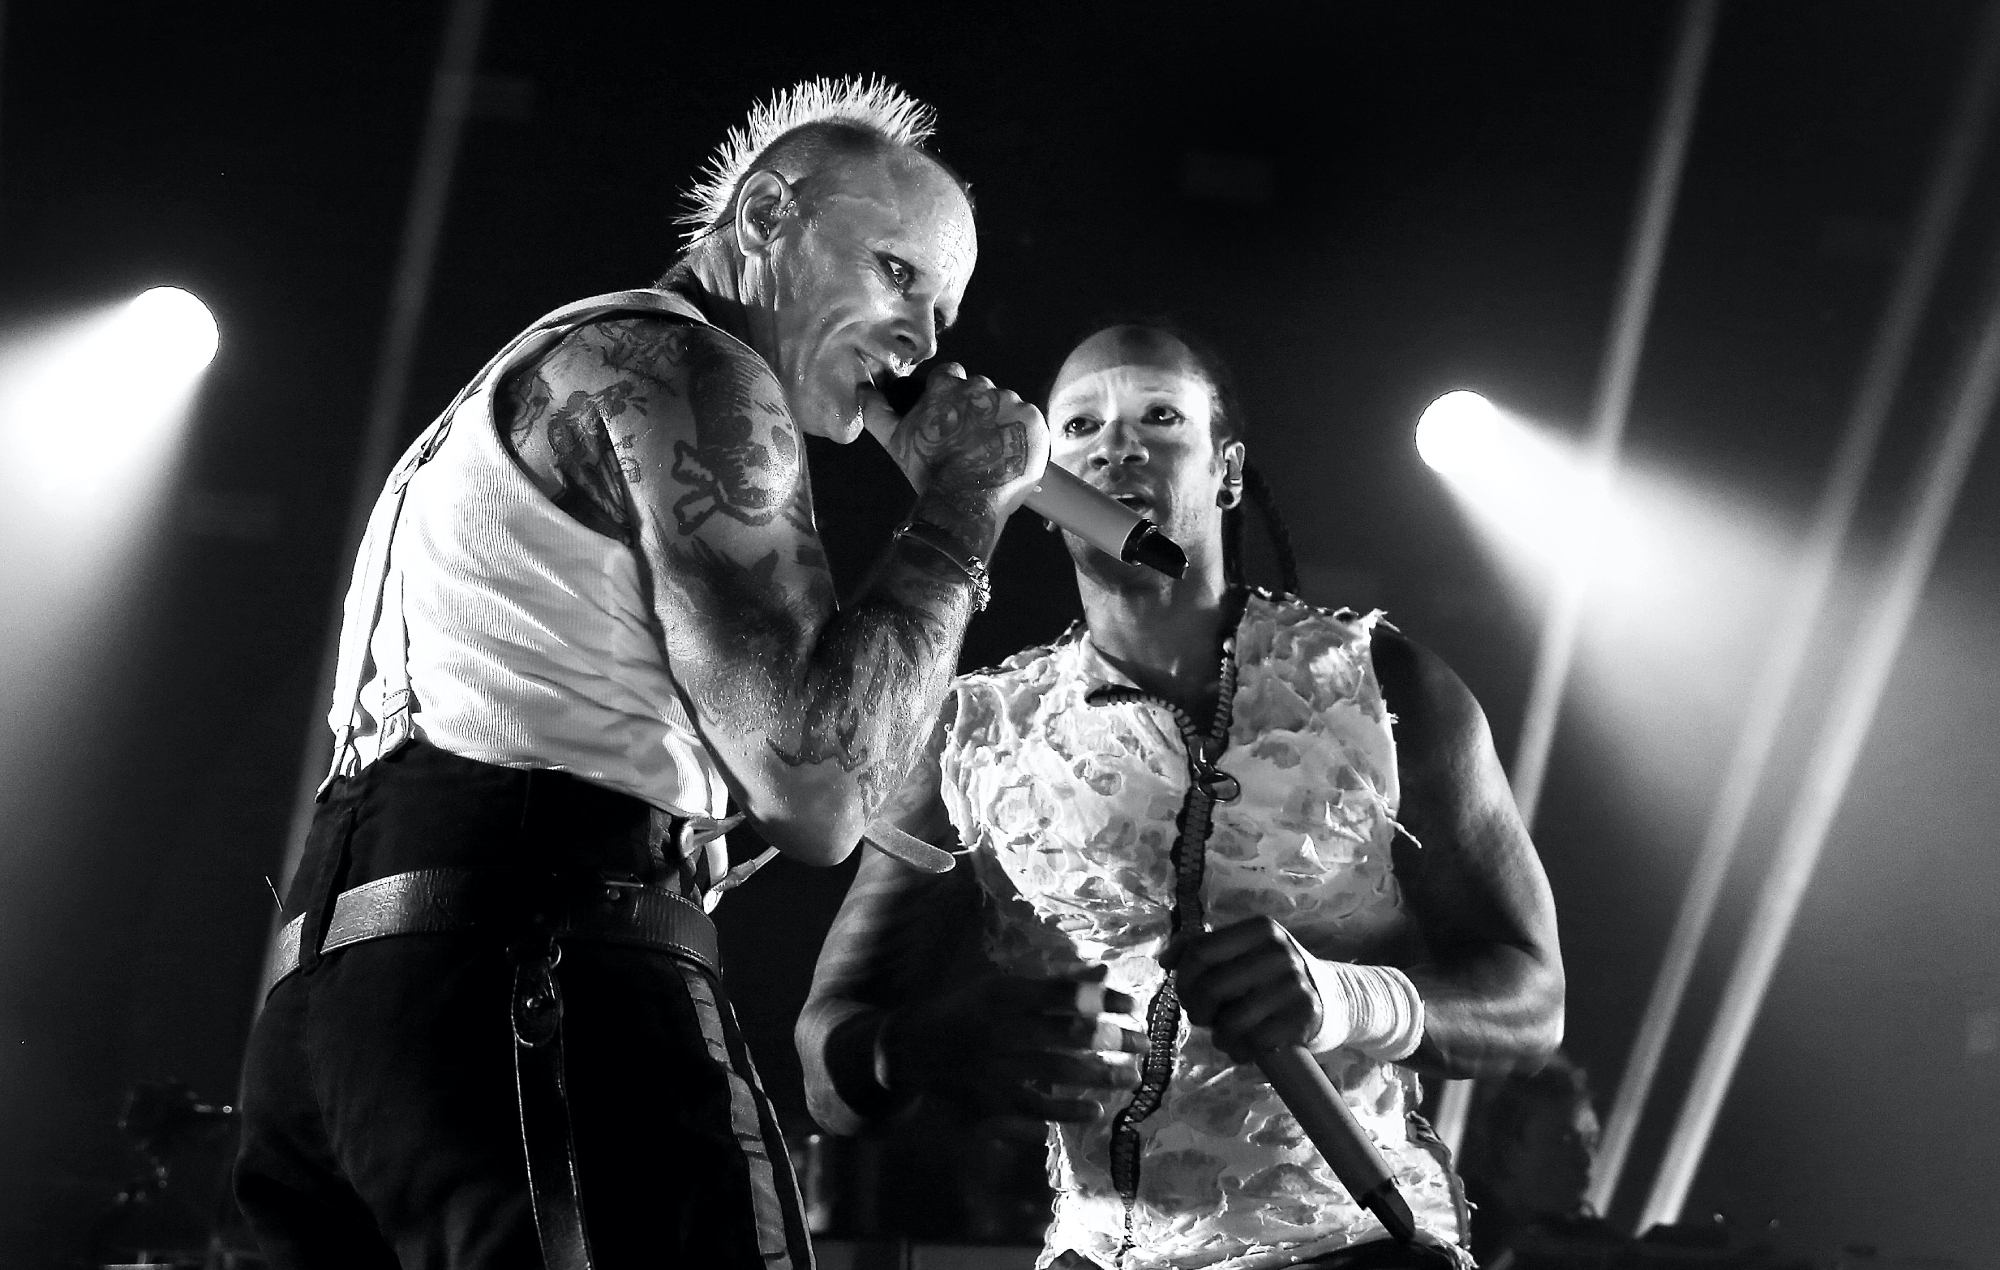 The Prodigy’s Maxim “burnt” his artwork after Keith Flint’s death